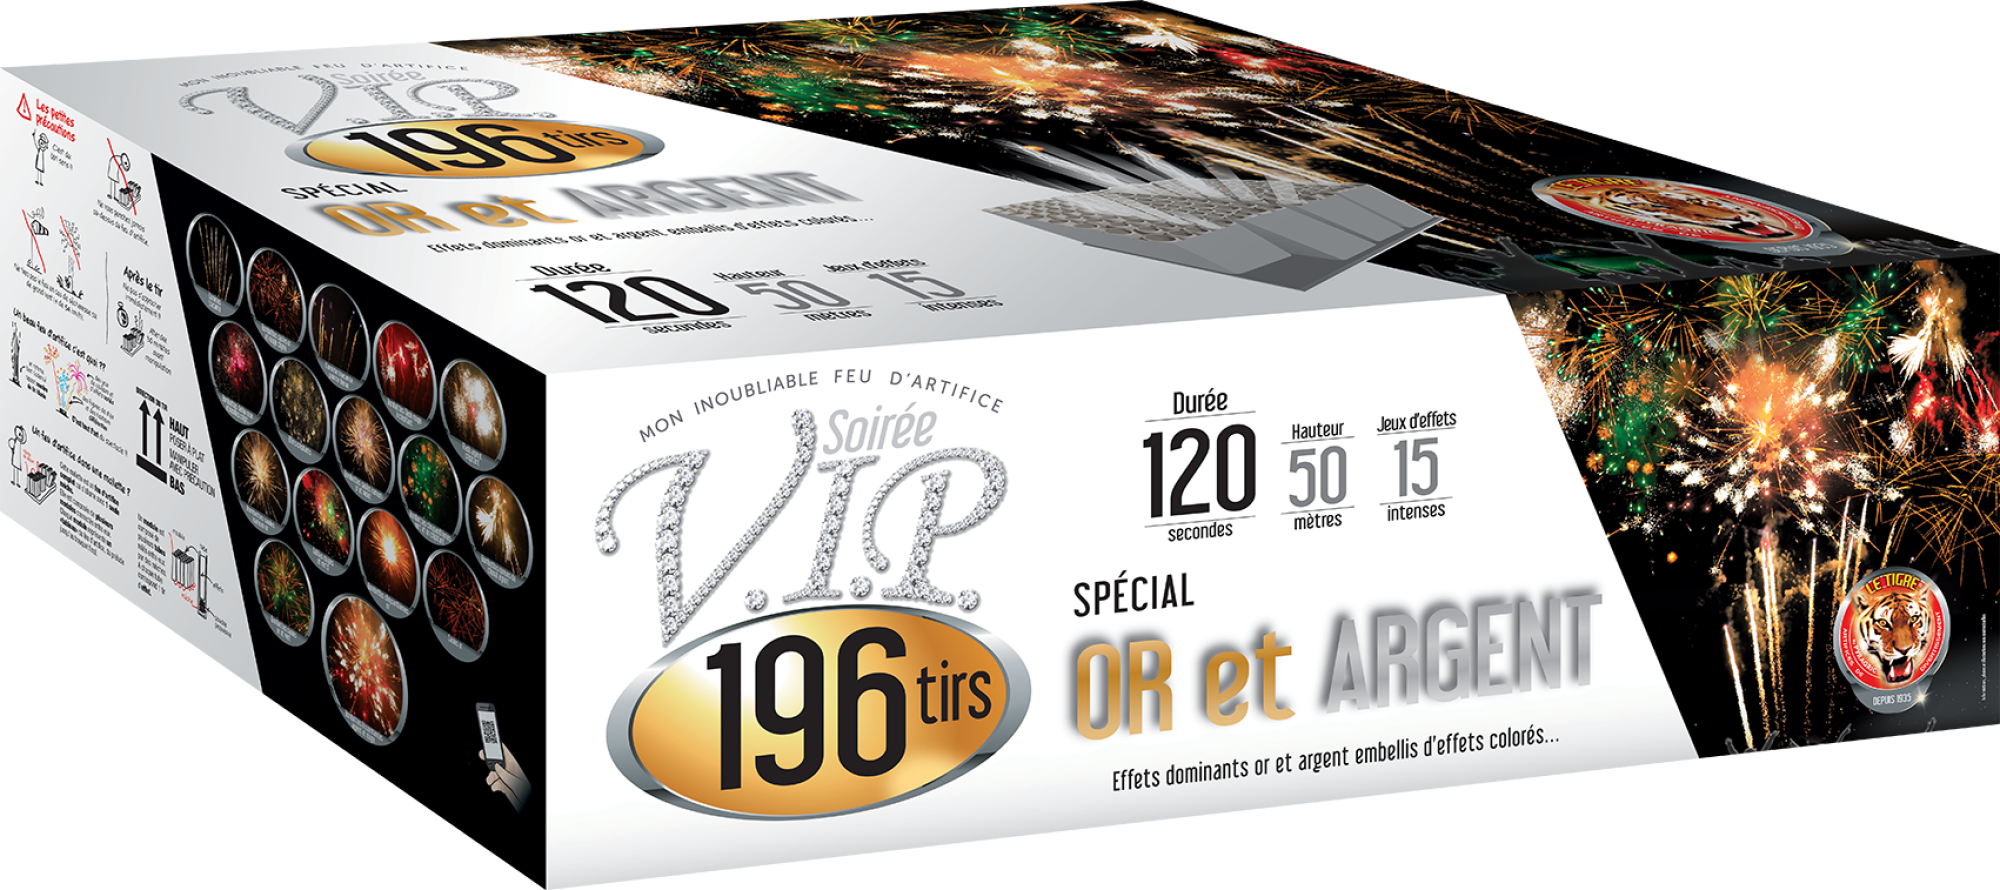 P166183-SOIREE VIP 196 TIRS OR & ARGENT 2